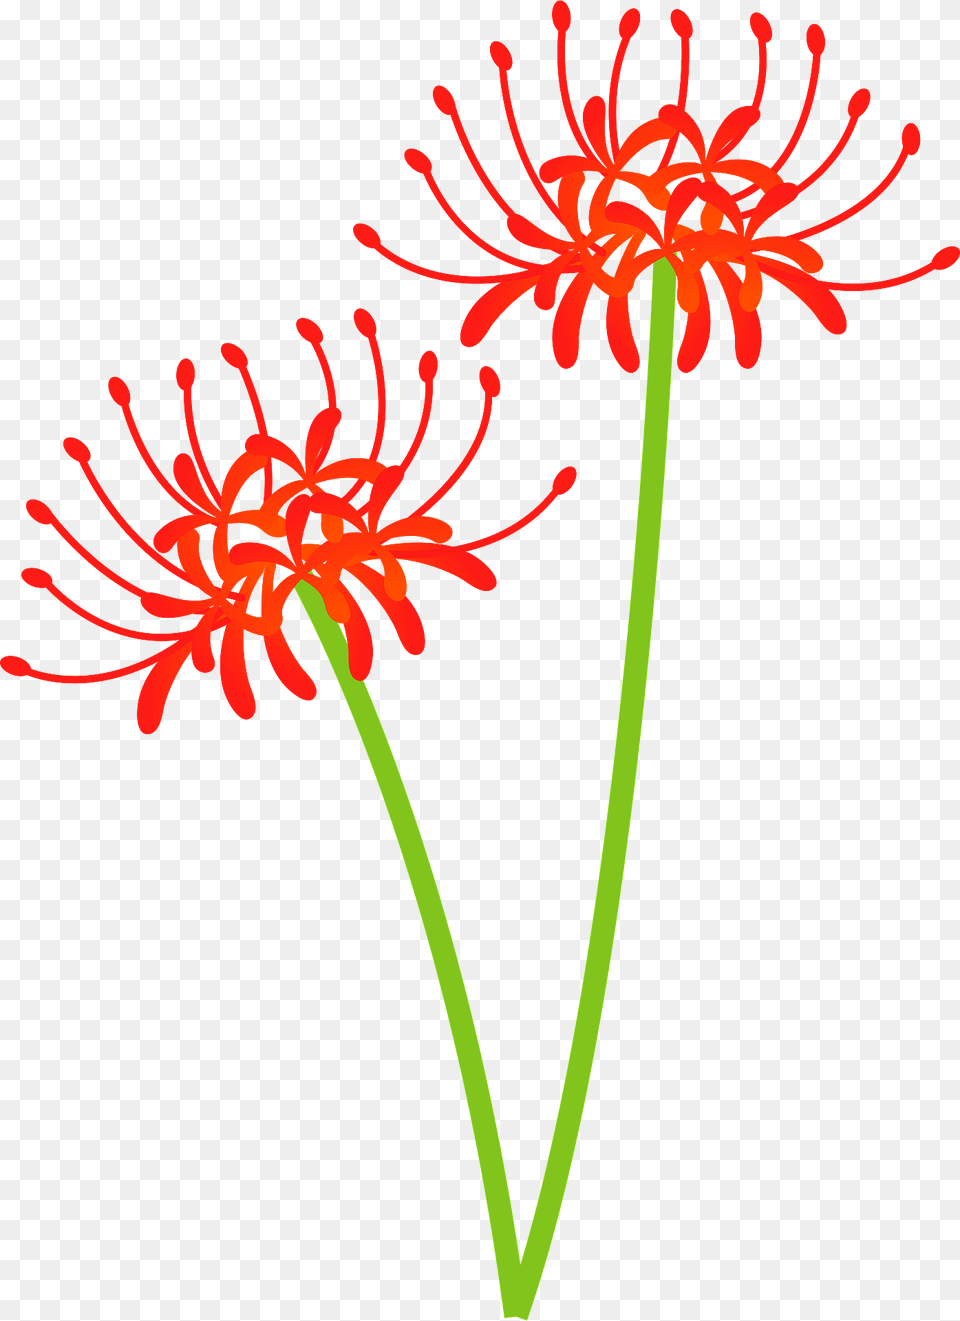 Red Spider Lily Flower Clipart, Anther, Plant, Petal, Dahlia Free Png